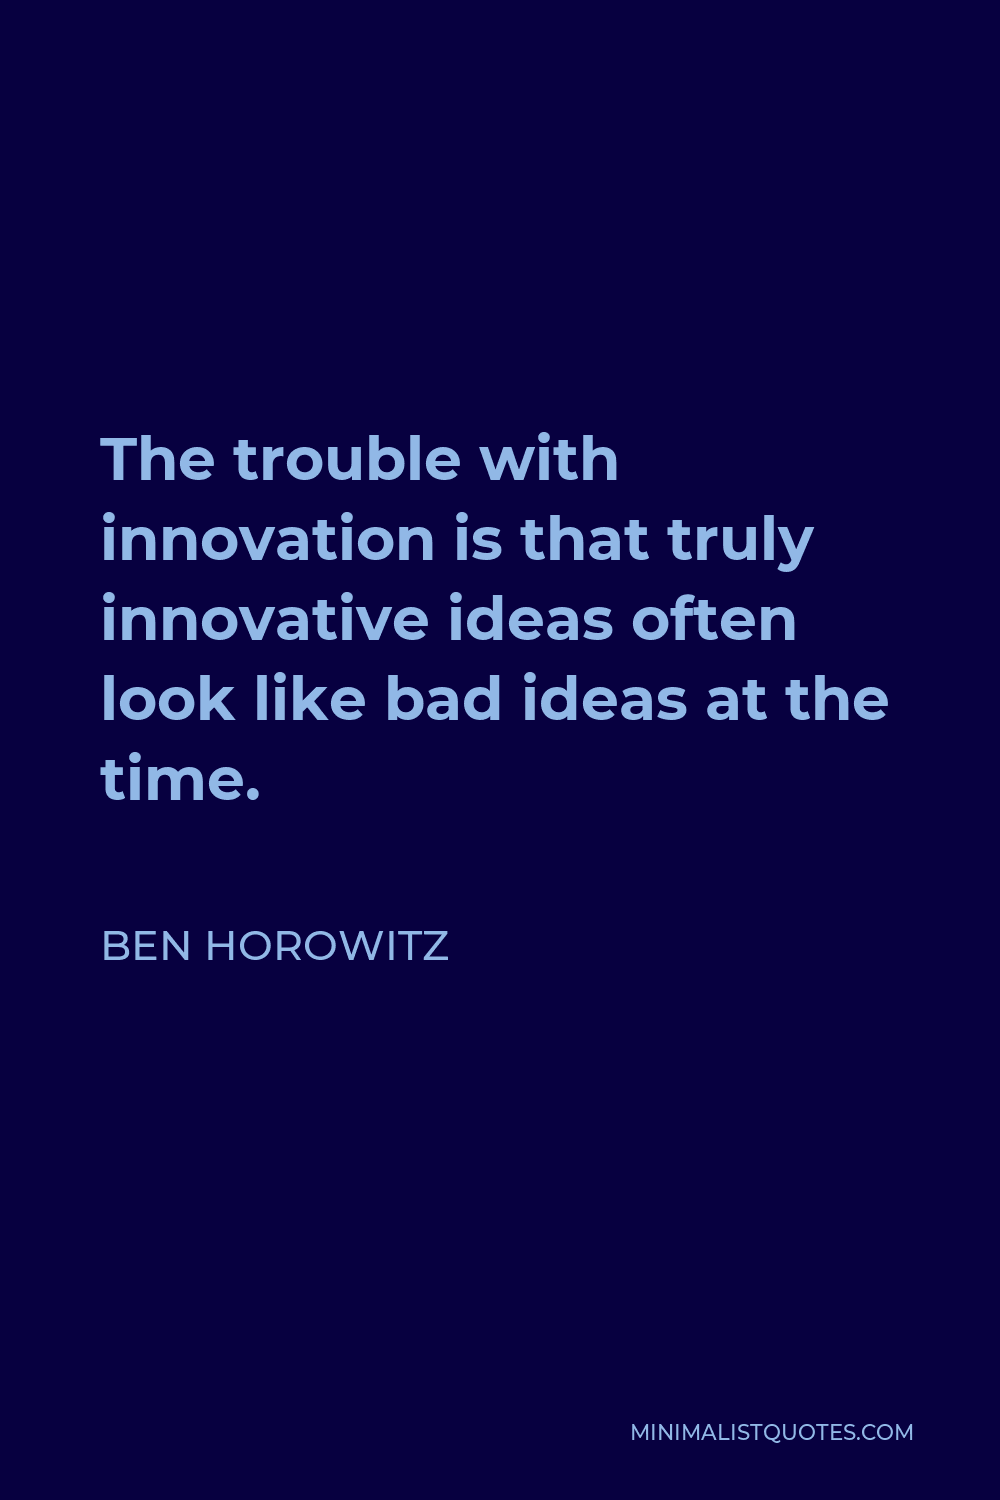 Ben Horowitz Quote - The trouble with innovation is that truly innovative ideas often look like bad ideas at the time.